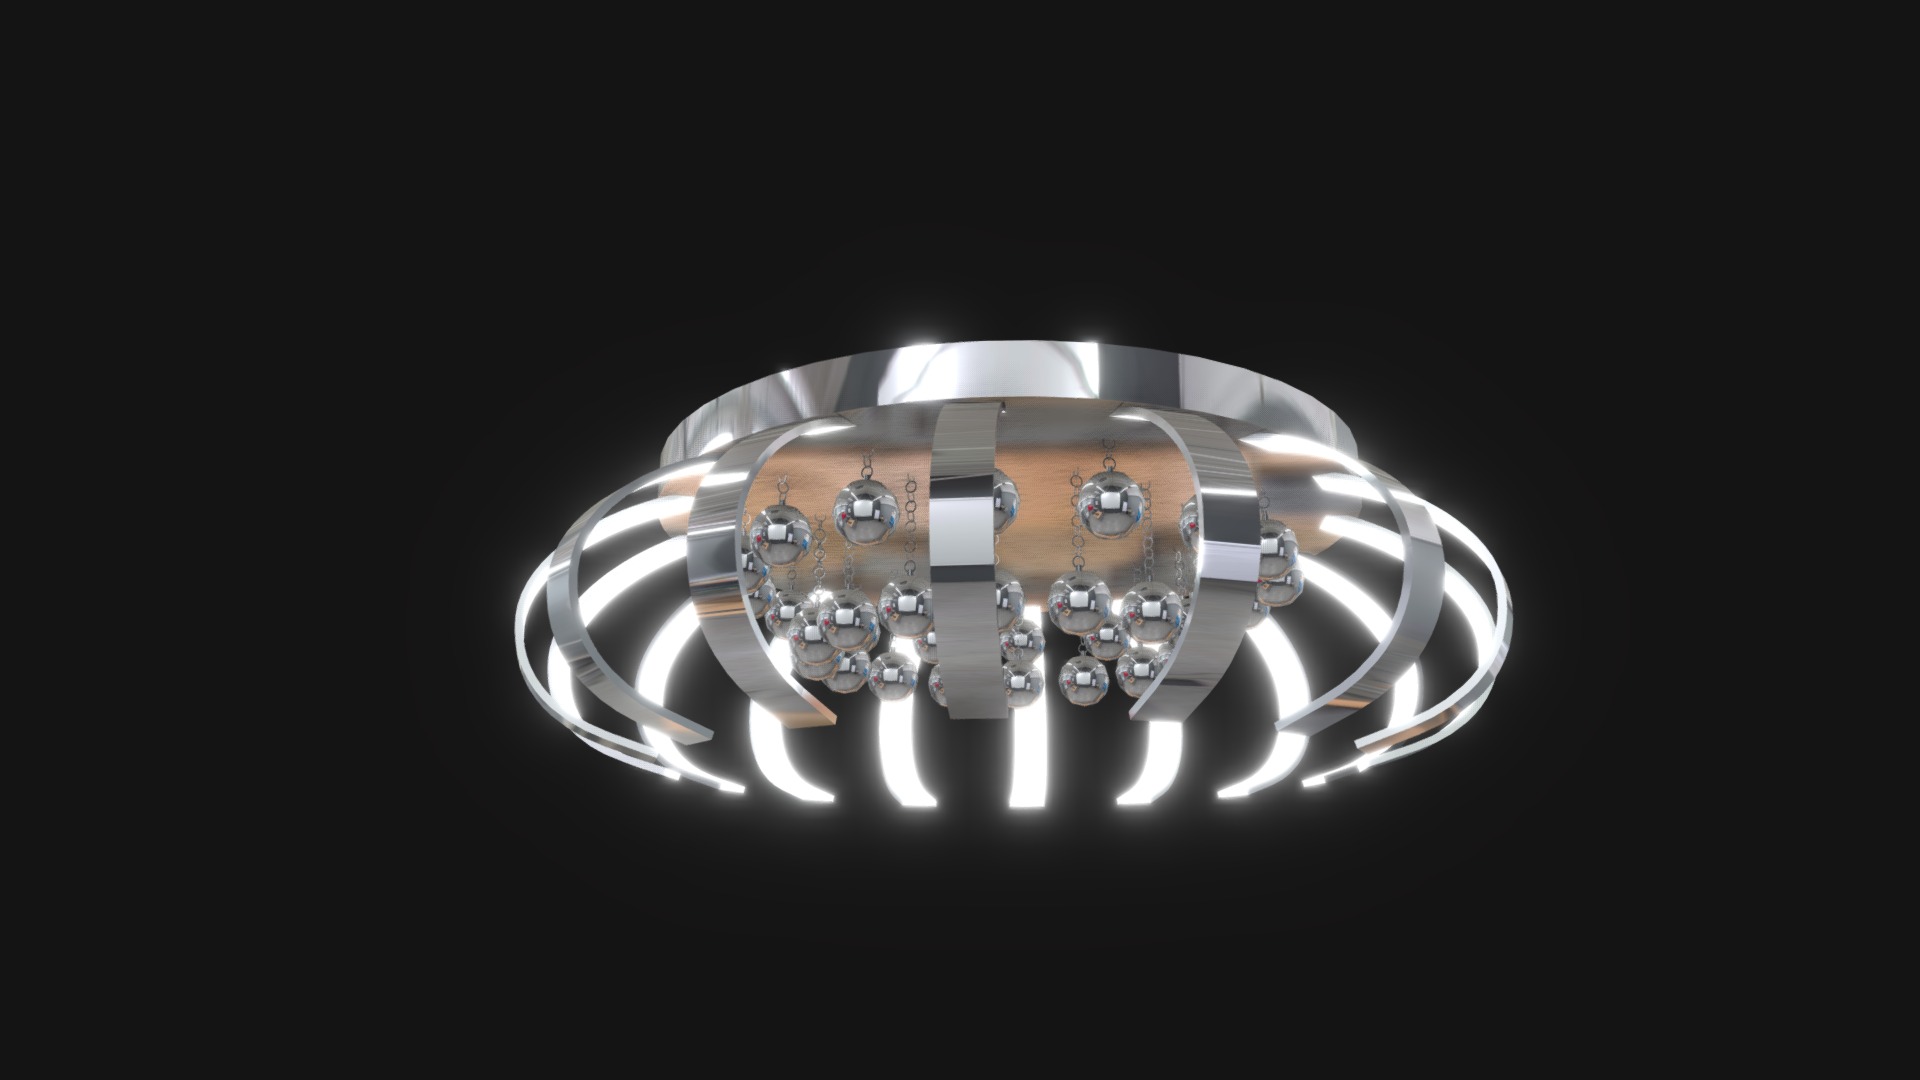 3D model HGPRL9255-16 - This is a 3D model of the HGPRL9255-16. The 3D model is about a silver and black bracelet.